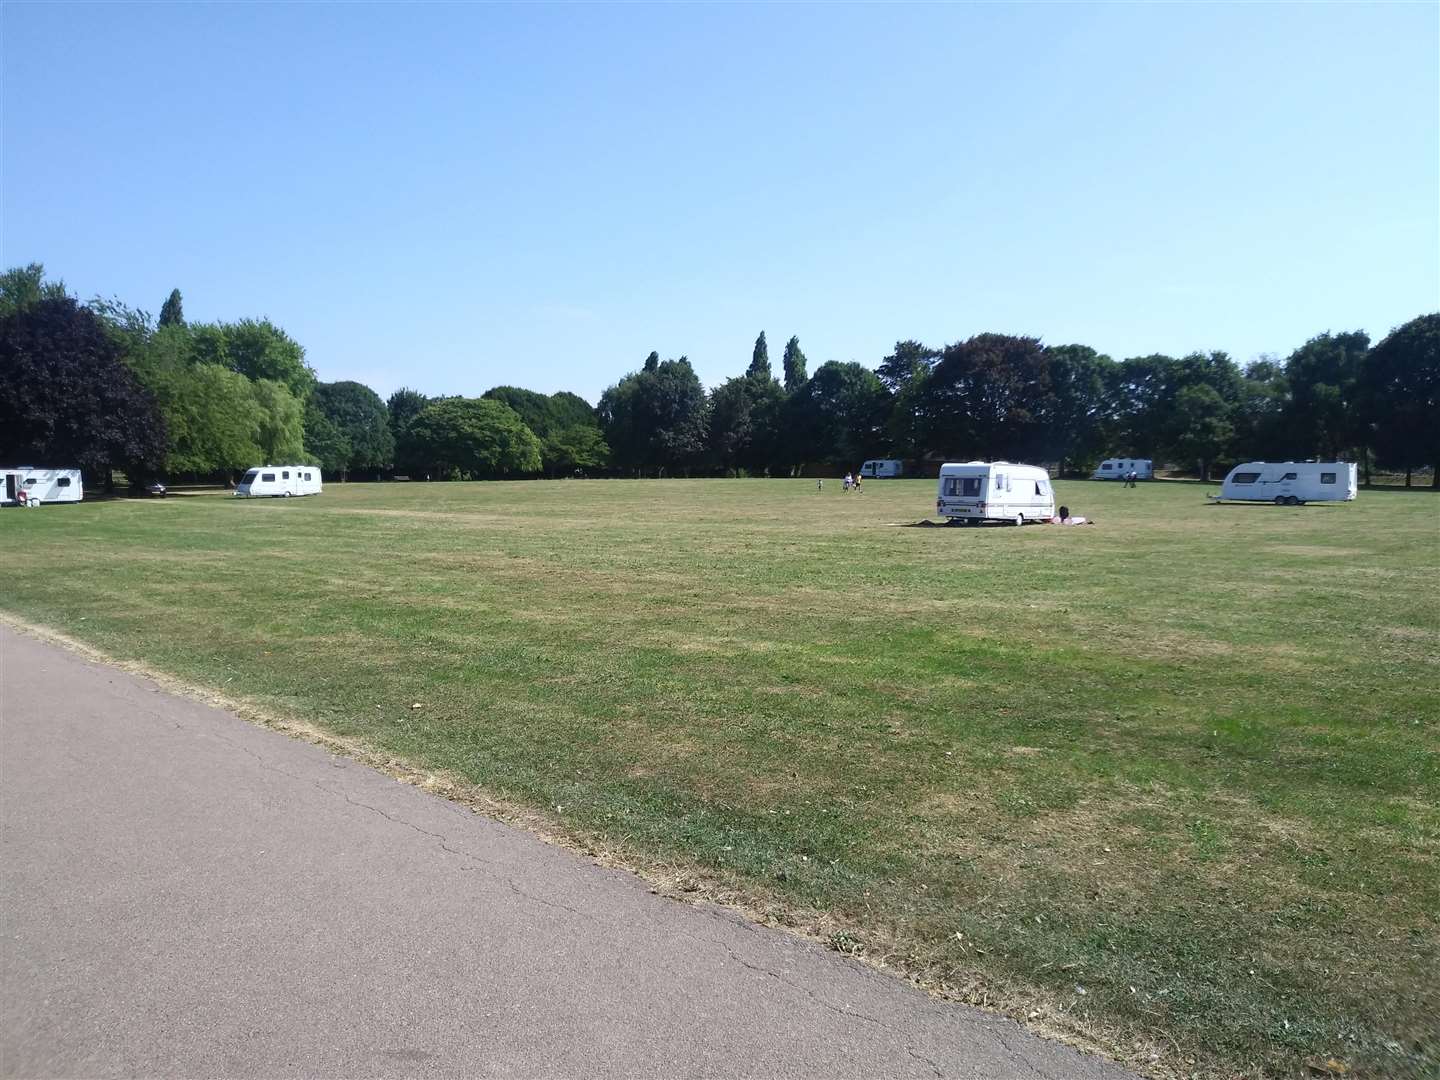 Travellers have set up camp on Cozenton Park near Splashes pool (3065851)